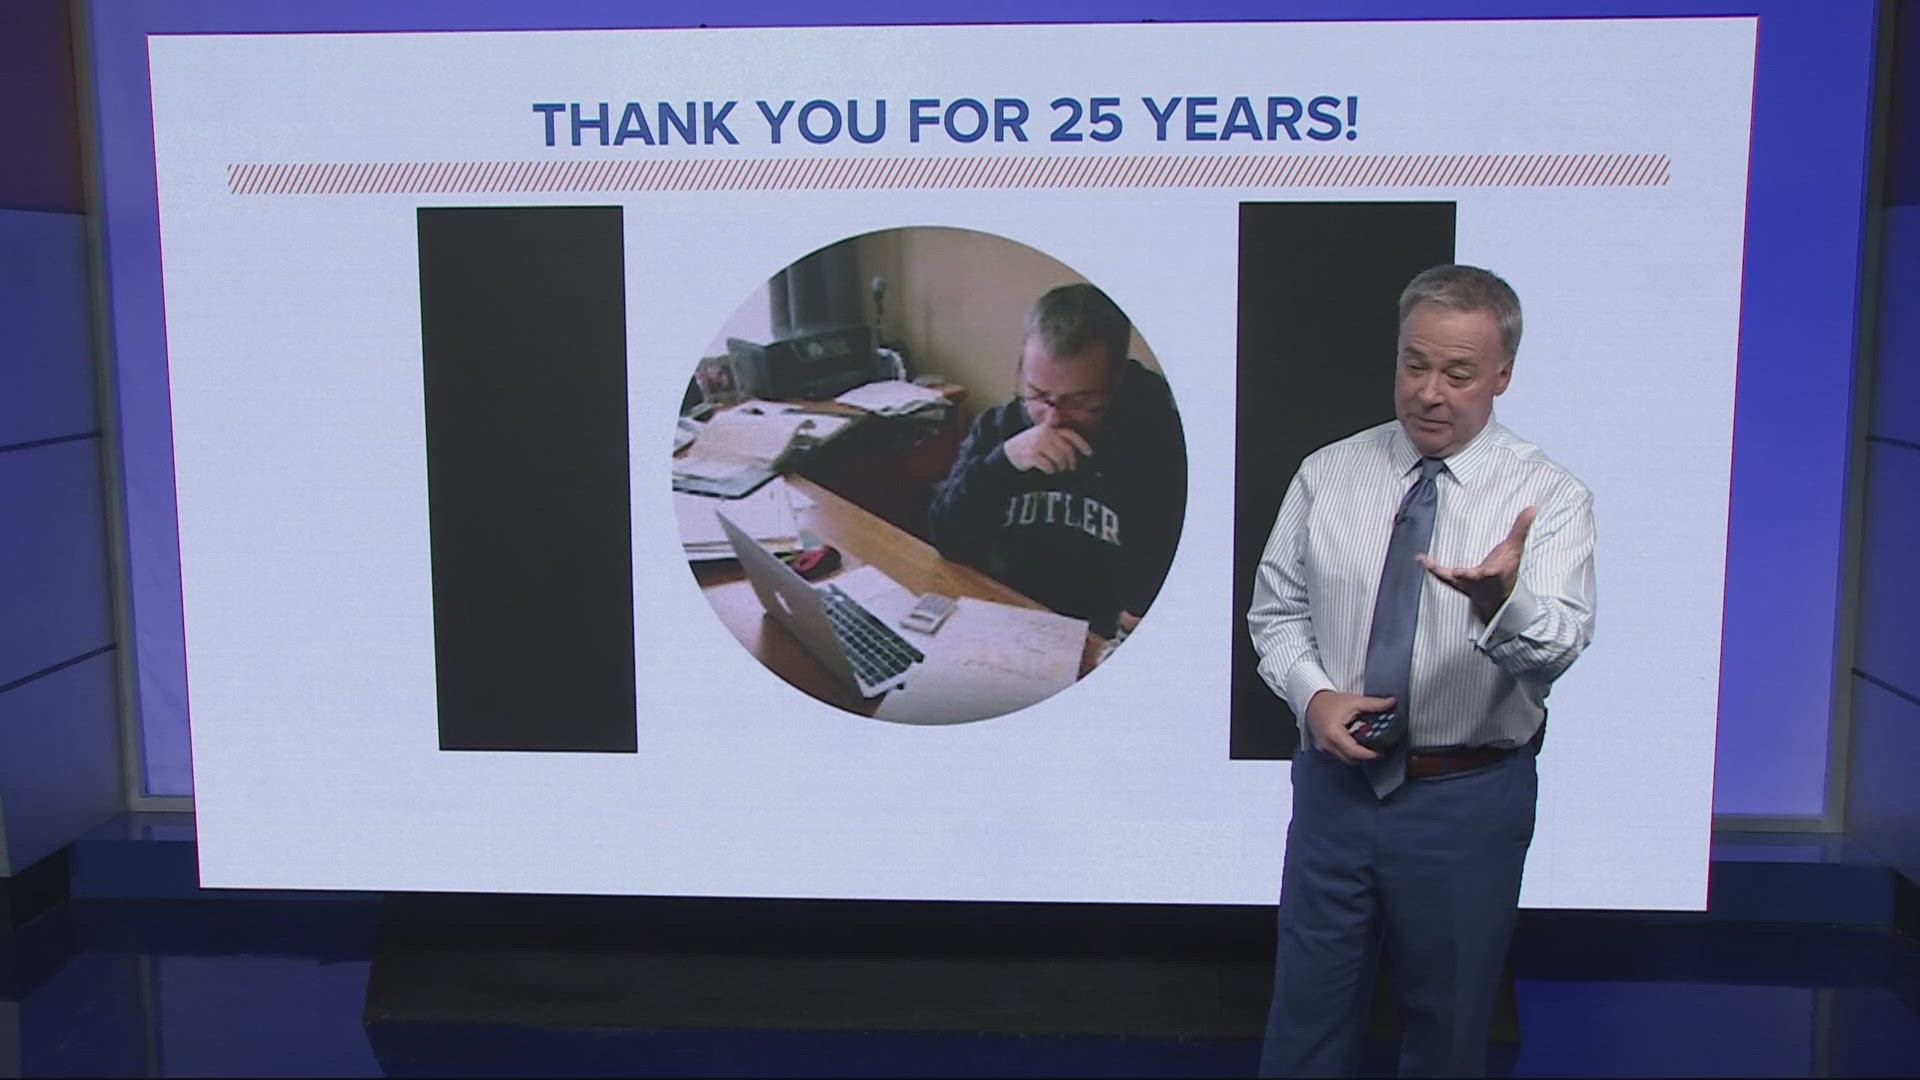 On Friday, KGW Sunrise meteorologist Rod Hill marked 25 years as a meteorologist on air in Portland. He shared a message of gratitude to those who have watched him.